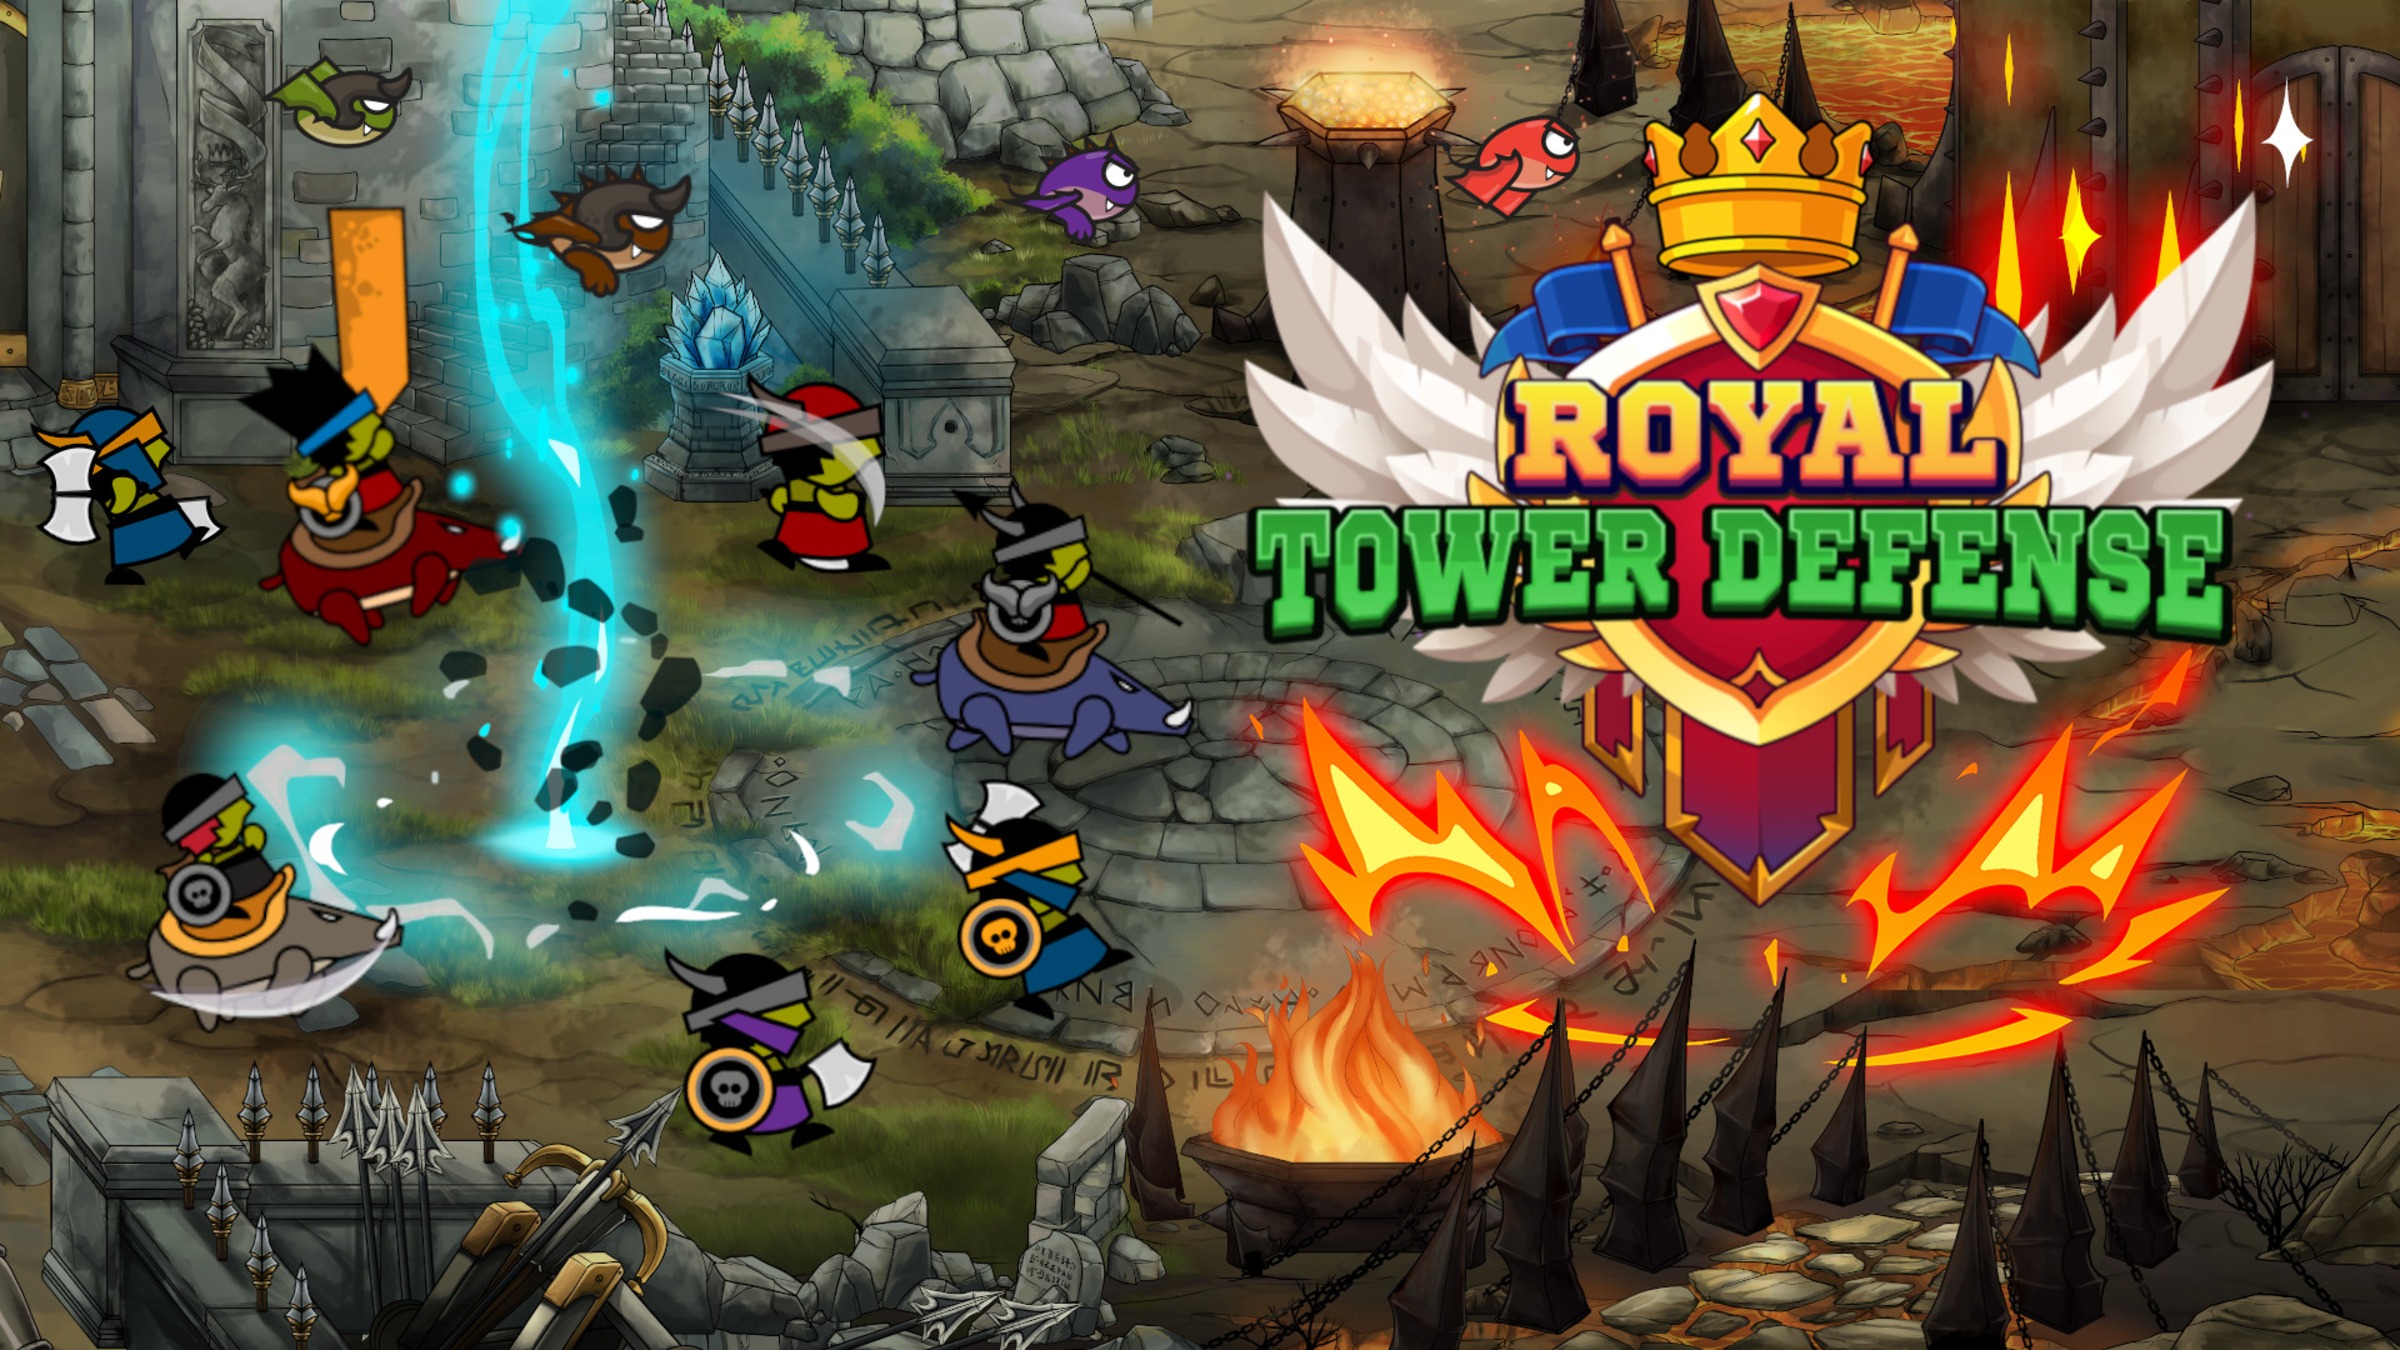 The Best Tower Defense Games On PC